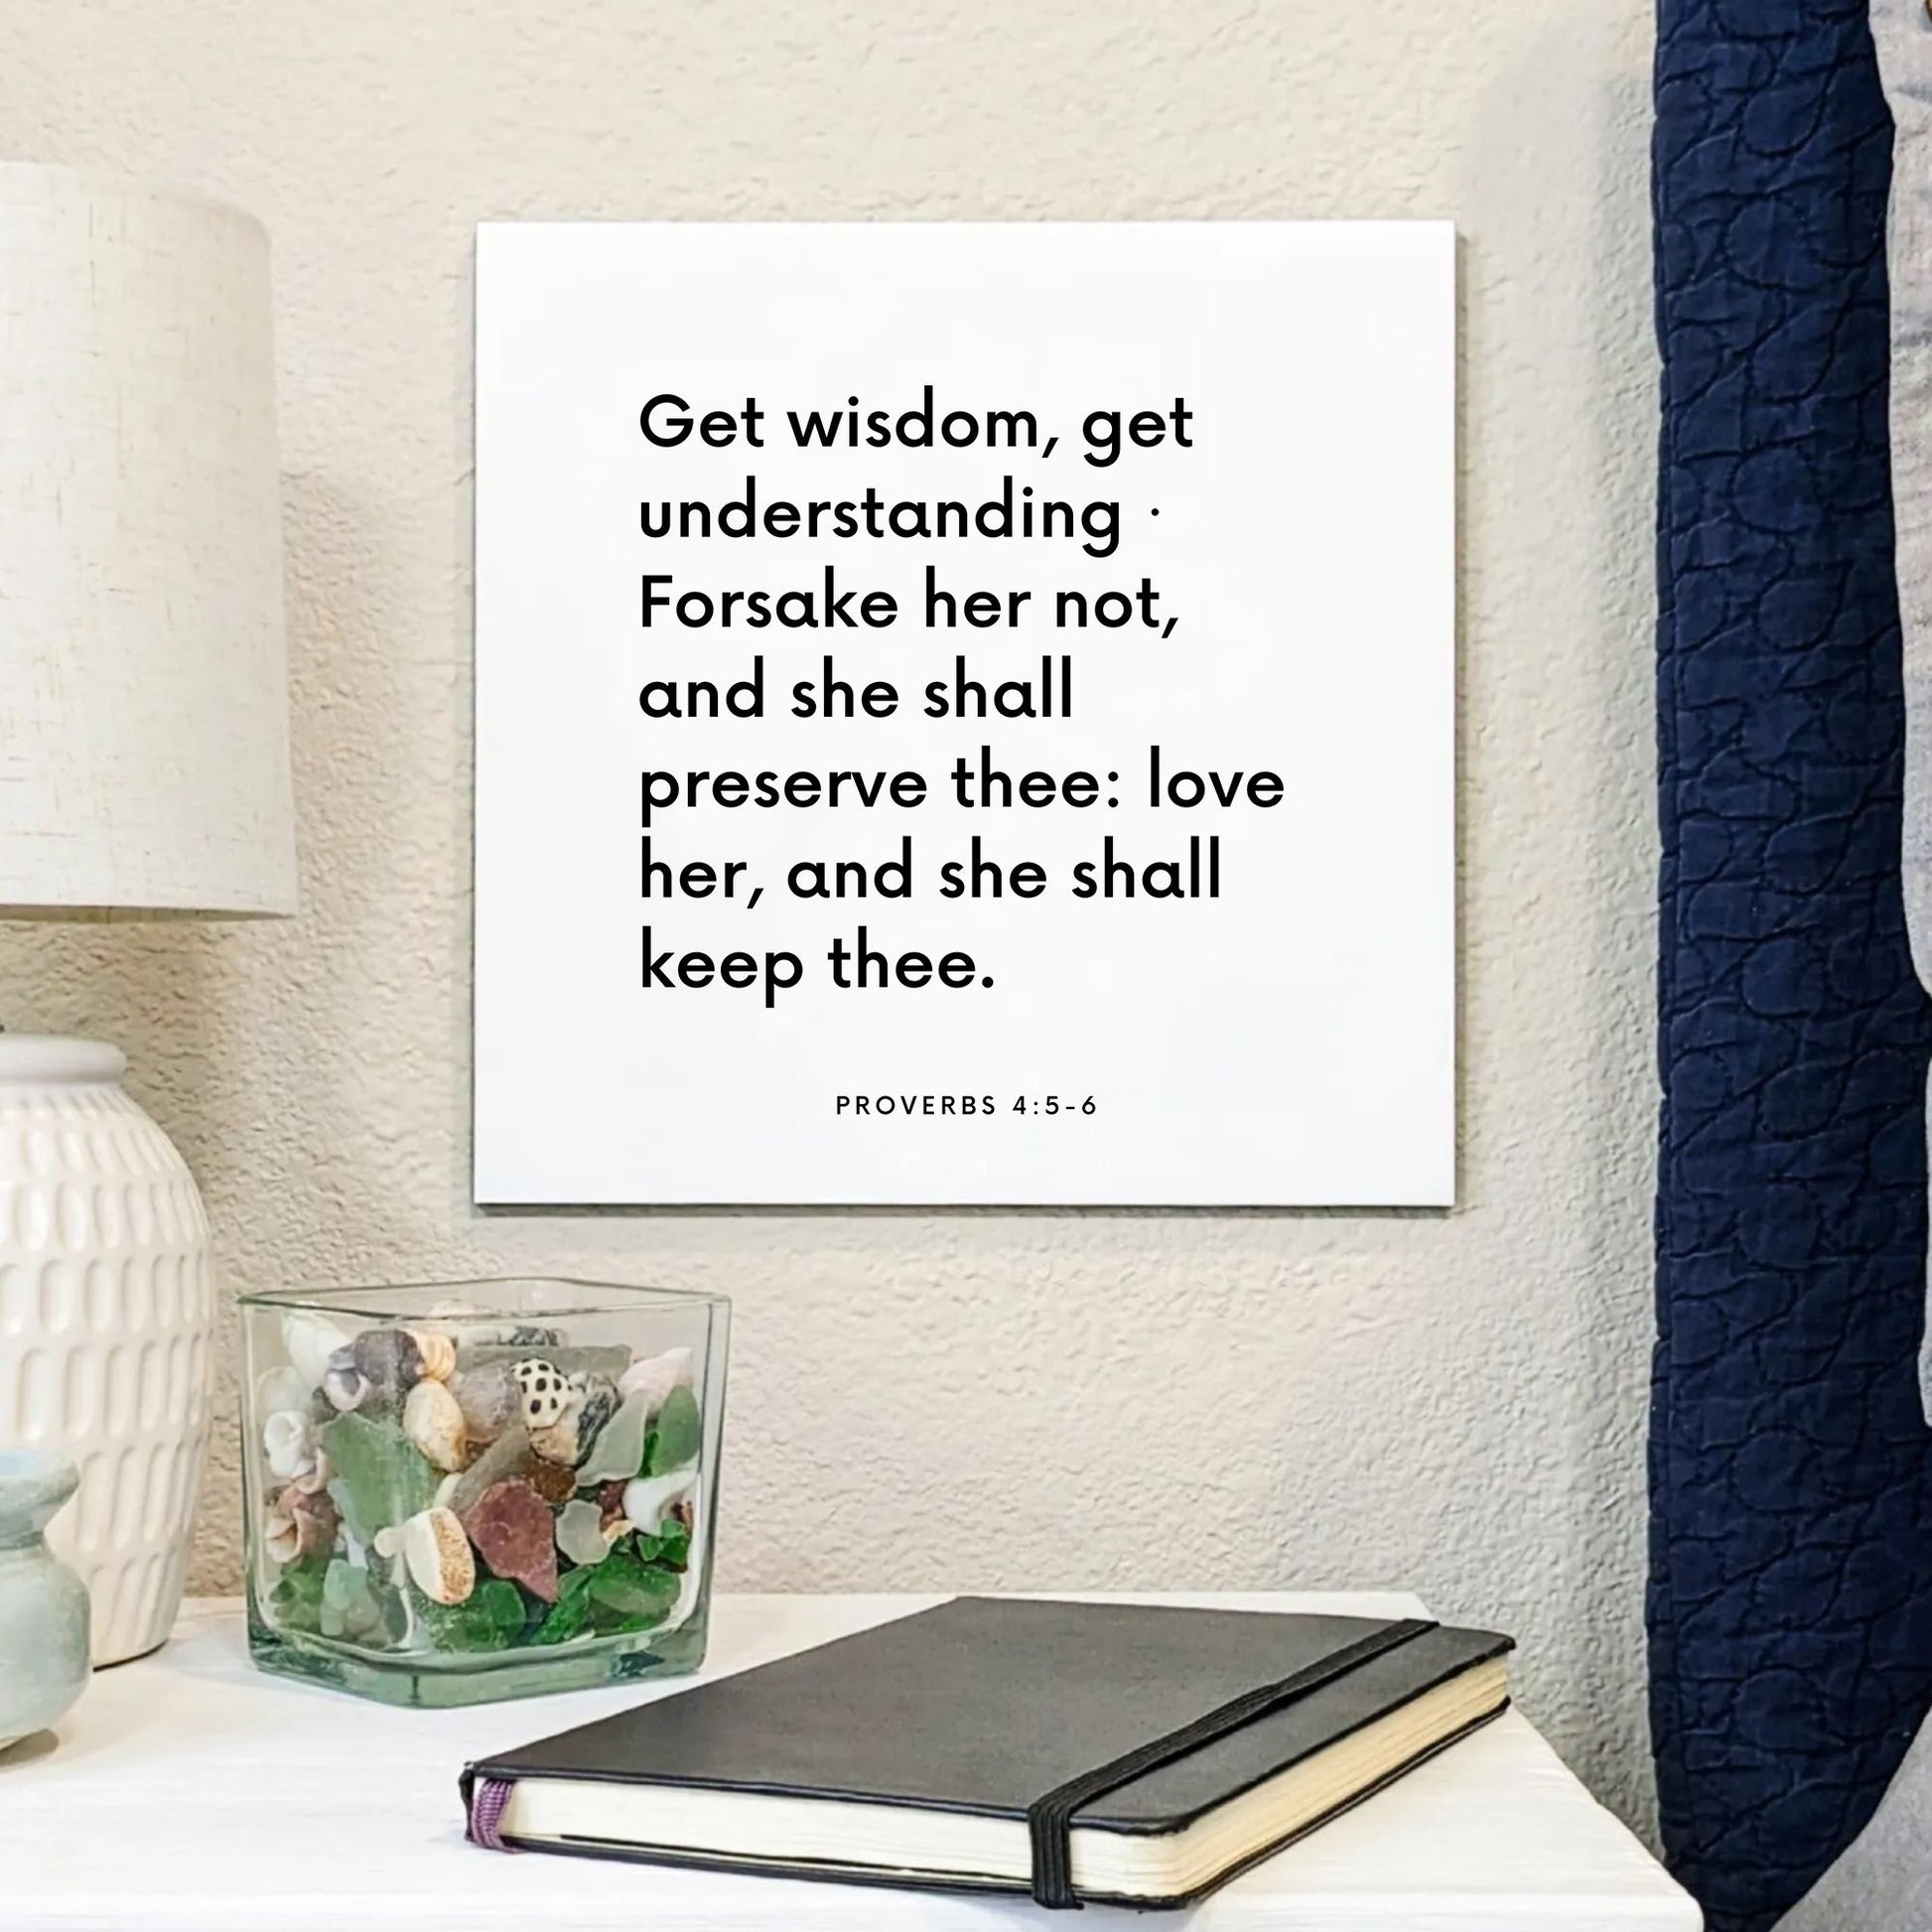 Bedside mouting of the scripture tile for Proverbs 4:5-6 - "Get wisdom, forsake her not, and she shall preserve thee"